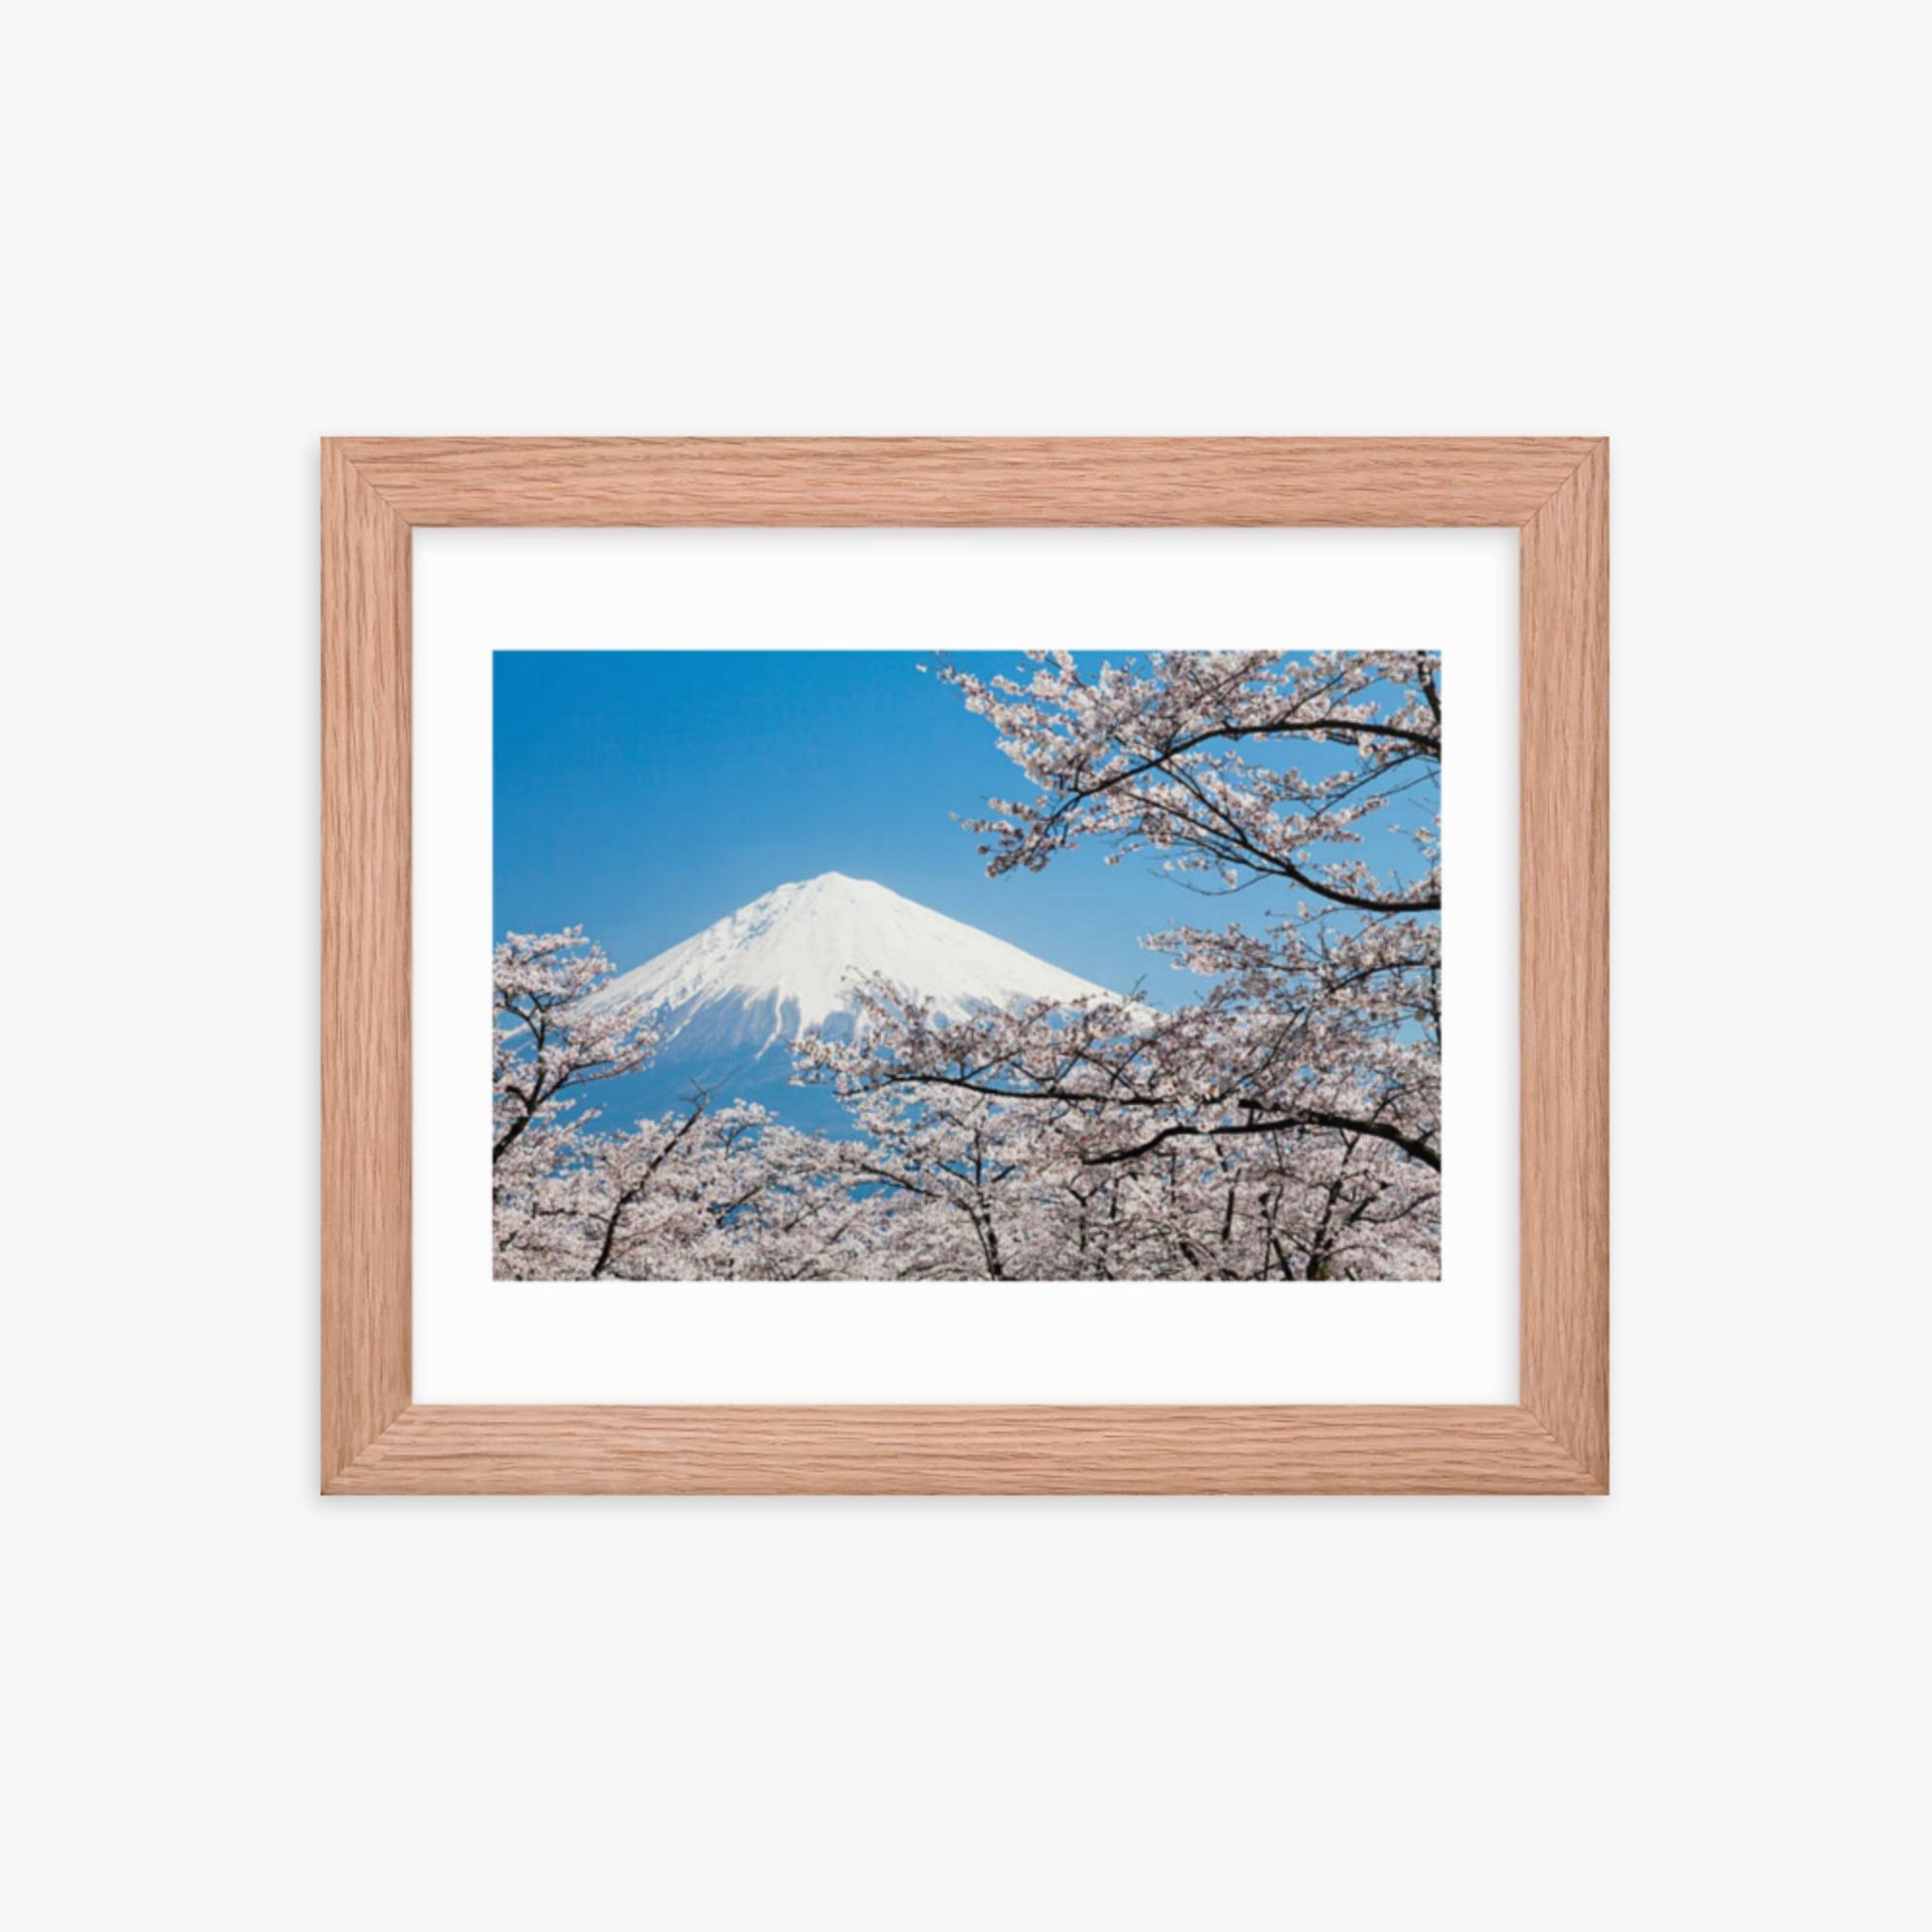 Mount Fuji & Cherry Blossoms 8x10 in Poster With Oak Frame